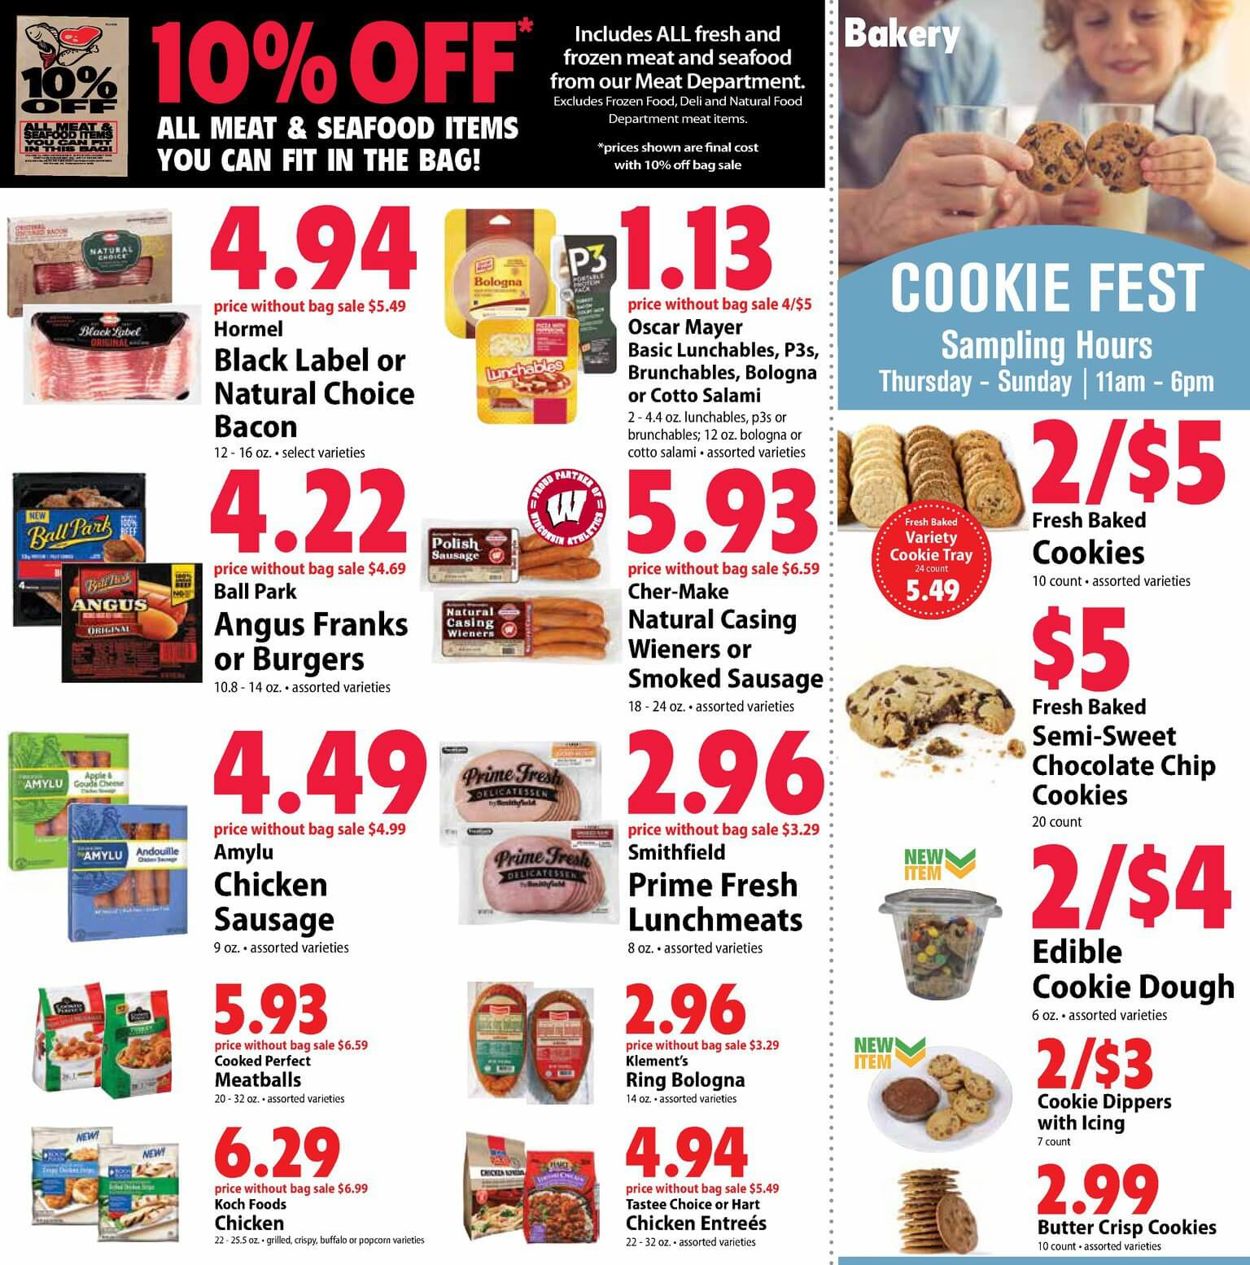 Catalogue Festival Foods from 06/05/2019